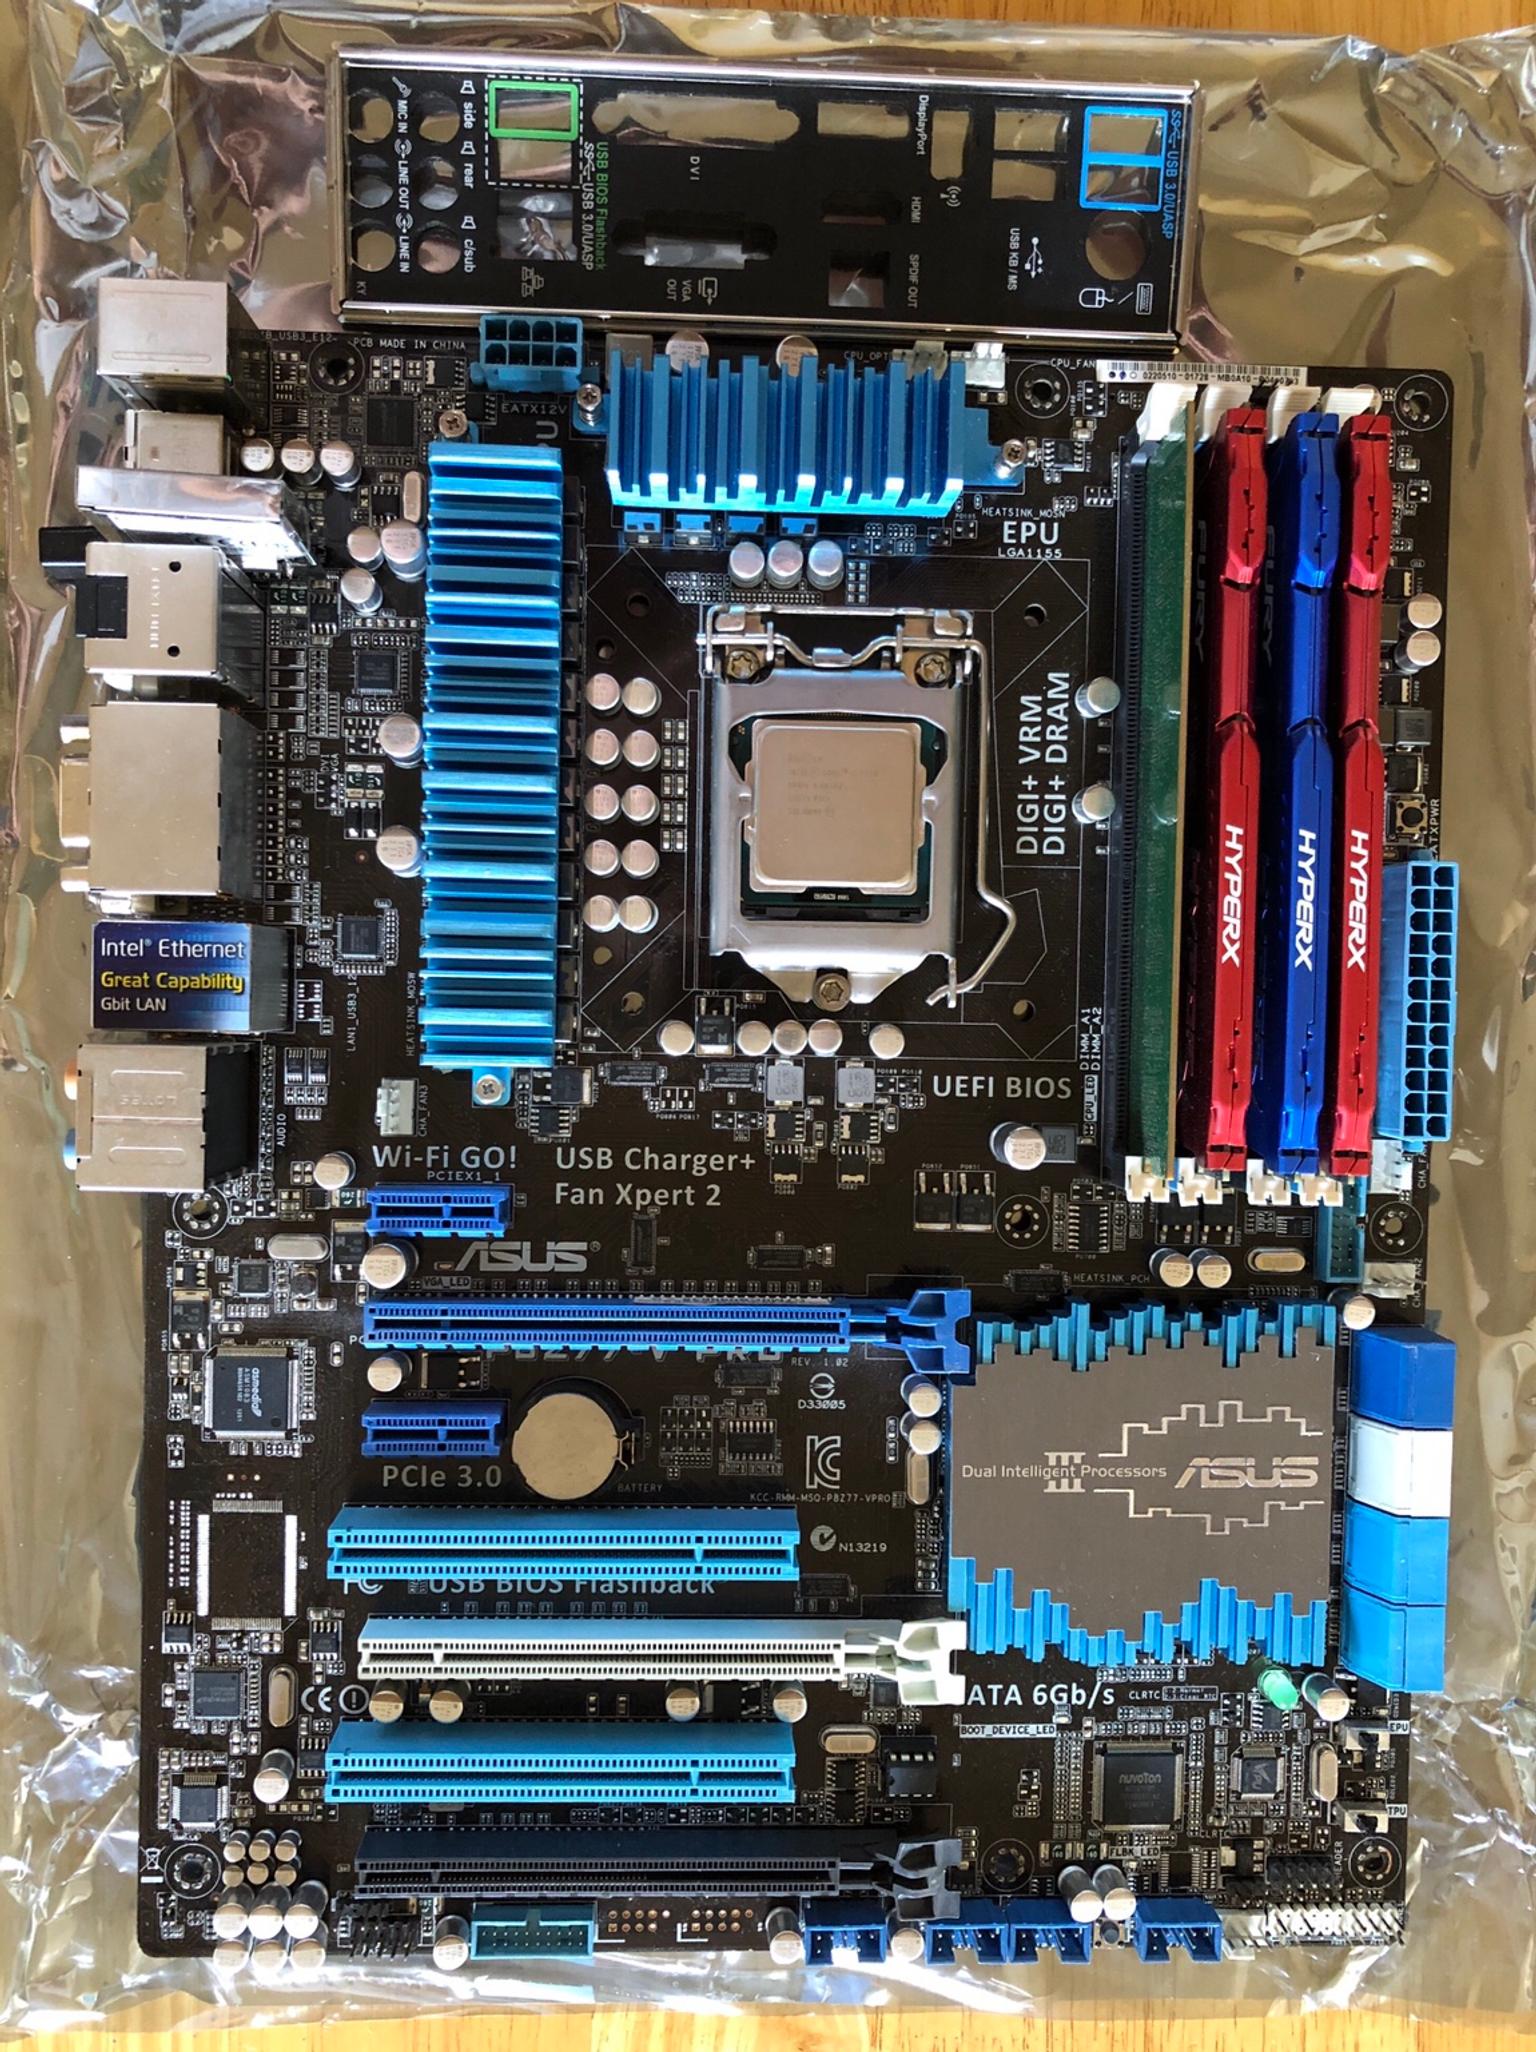 CPU Motherboard Ram i7 3770 16GB Ram in W12 London for £219.00 for sale